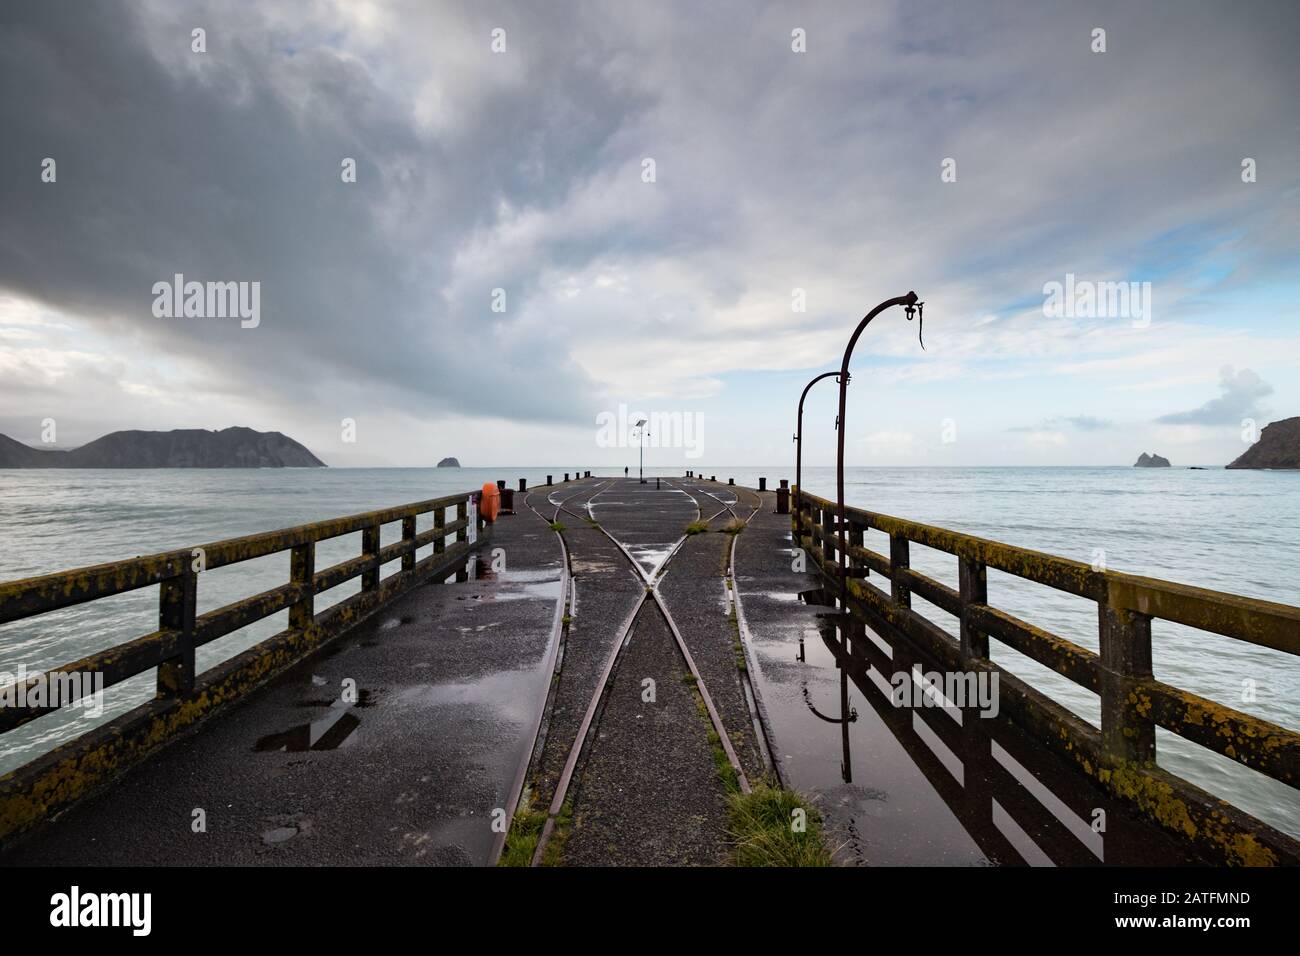 View from the longest wharf (Tolaga Bay) in New Zealand with dramatic clouds and reflections in a puddle along rail tracks and cranes. Stock Photo